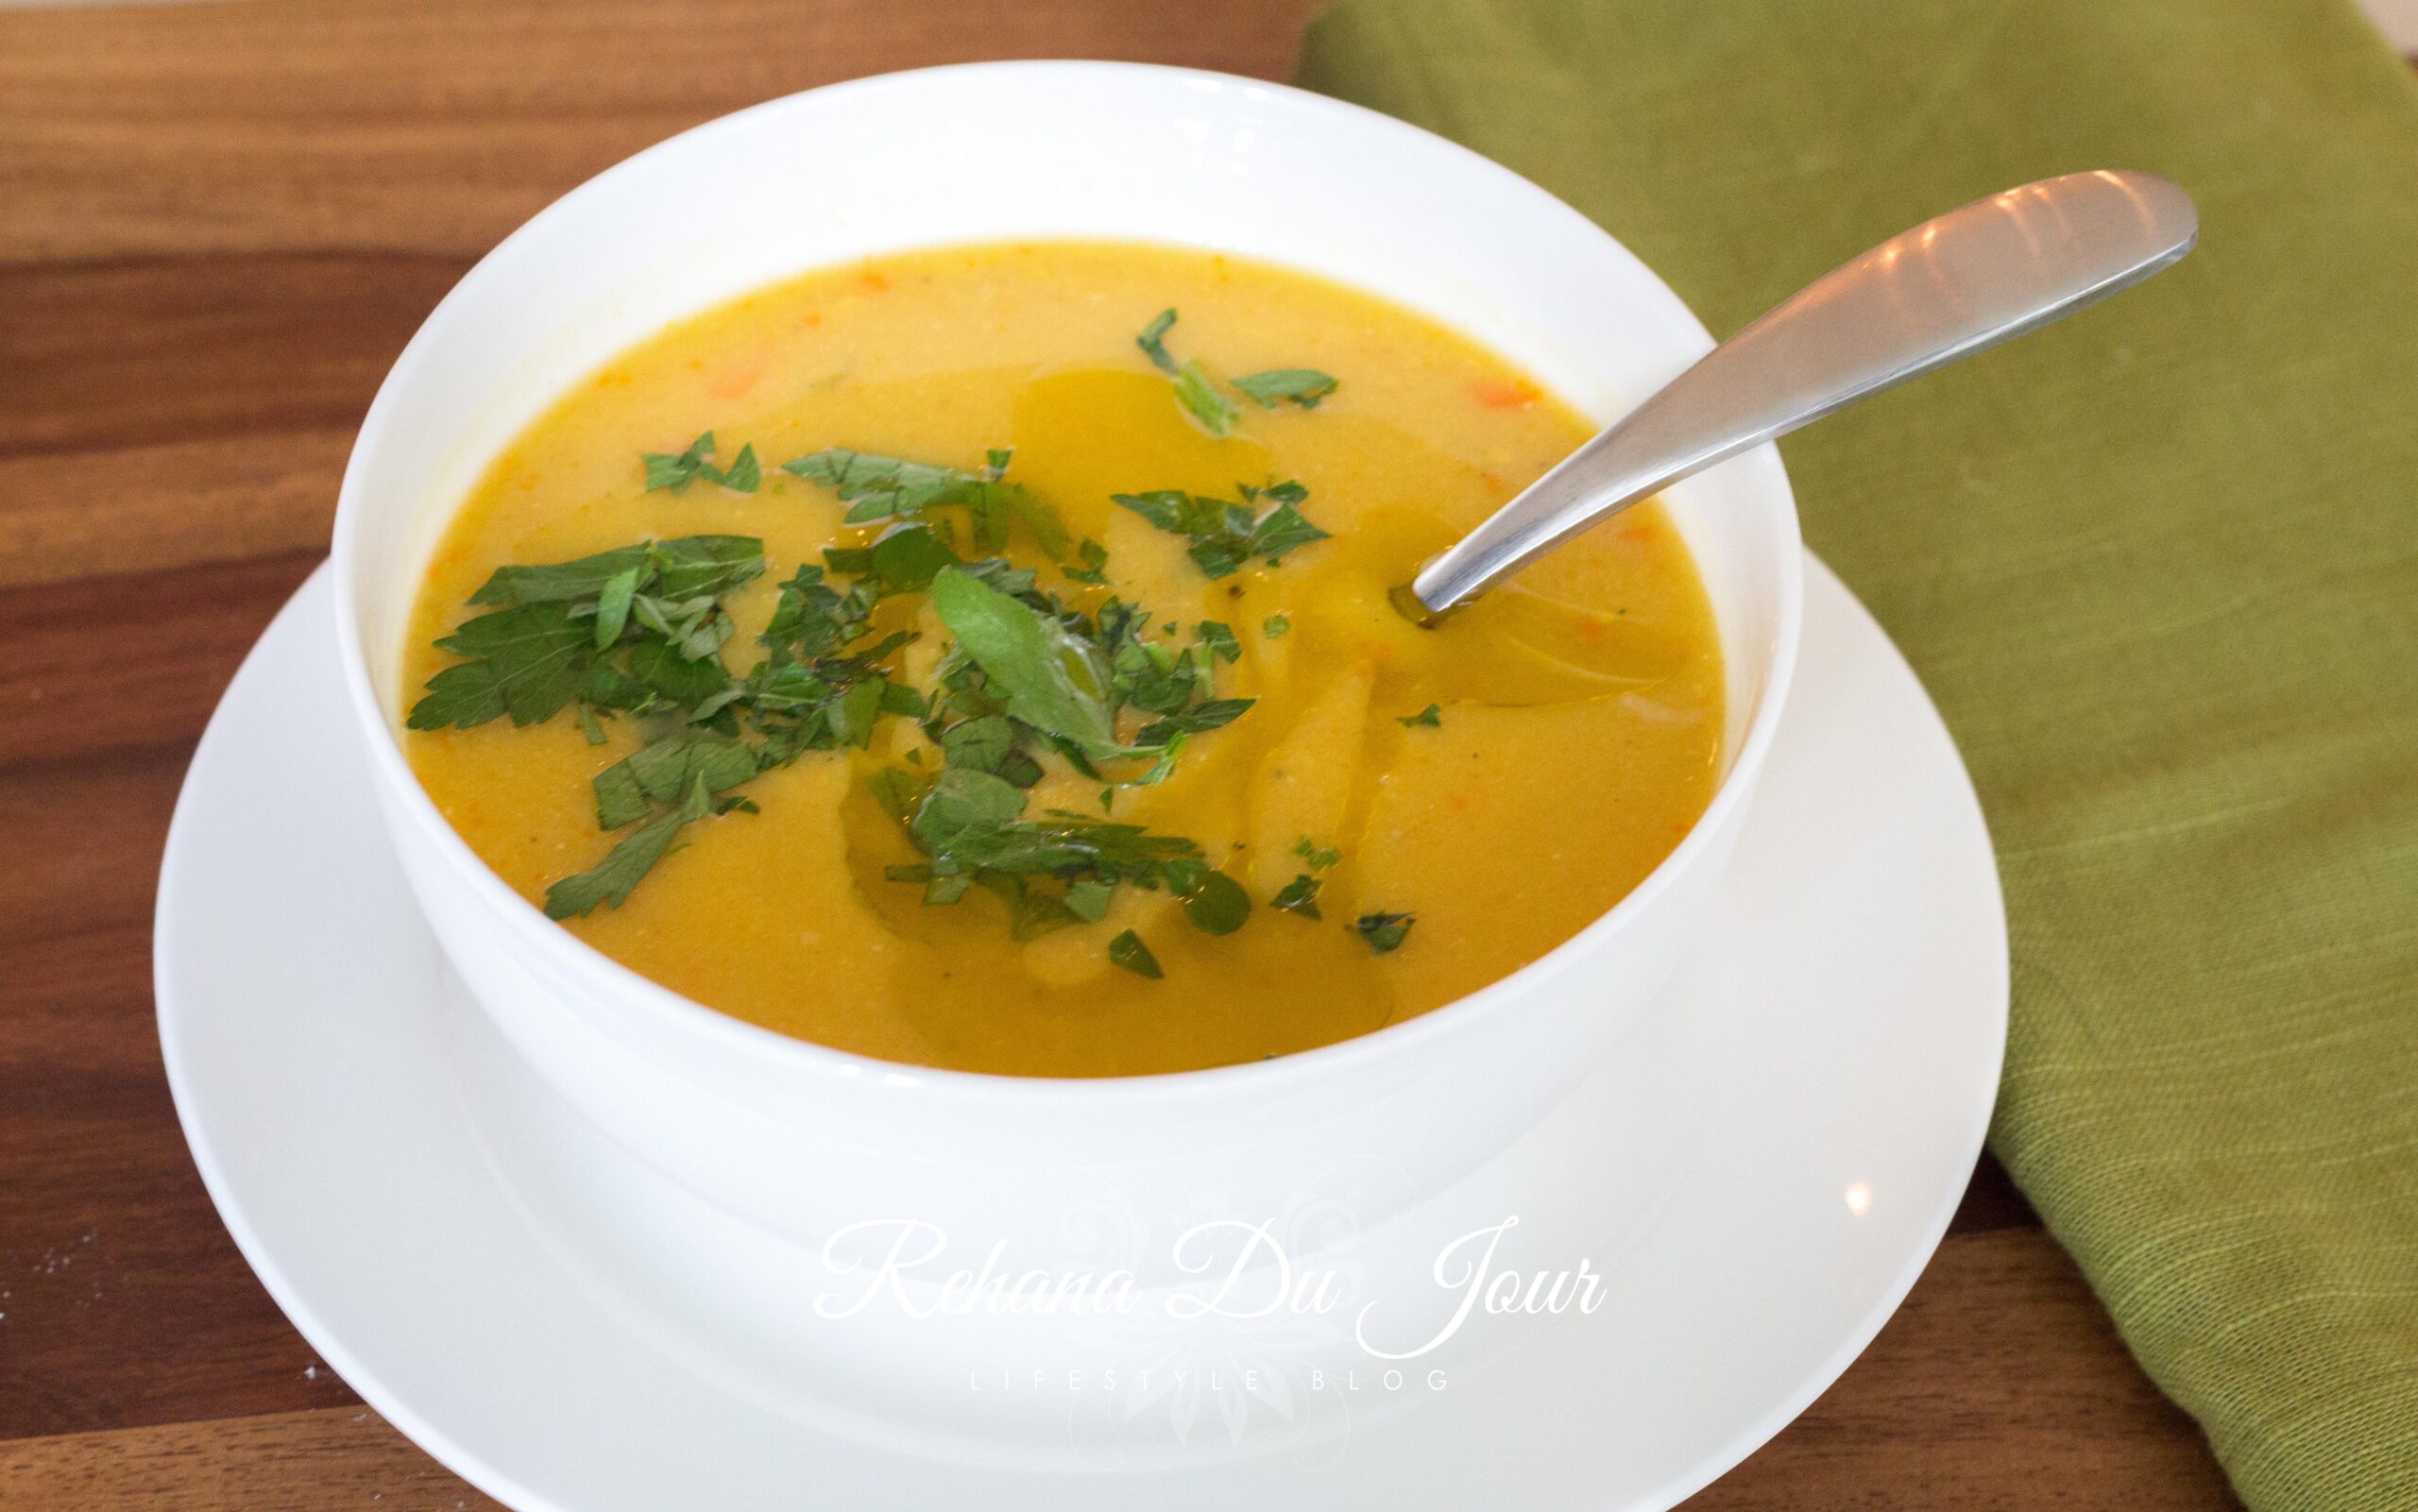  Healthy and hearty: Arabic Lentil Soup